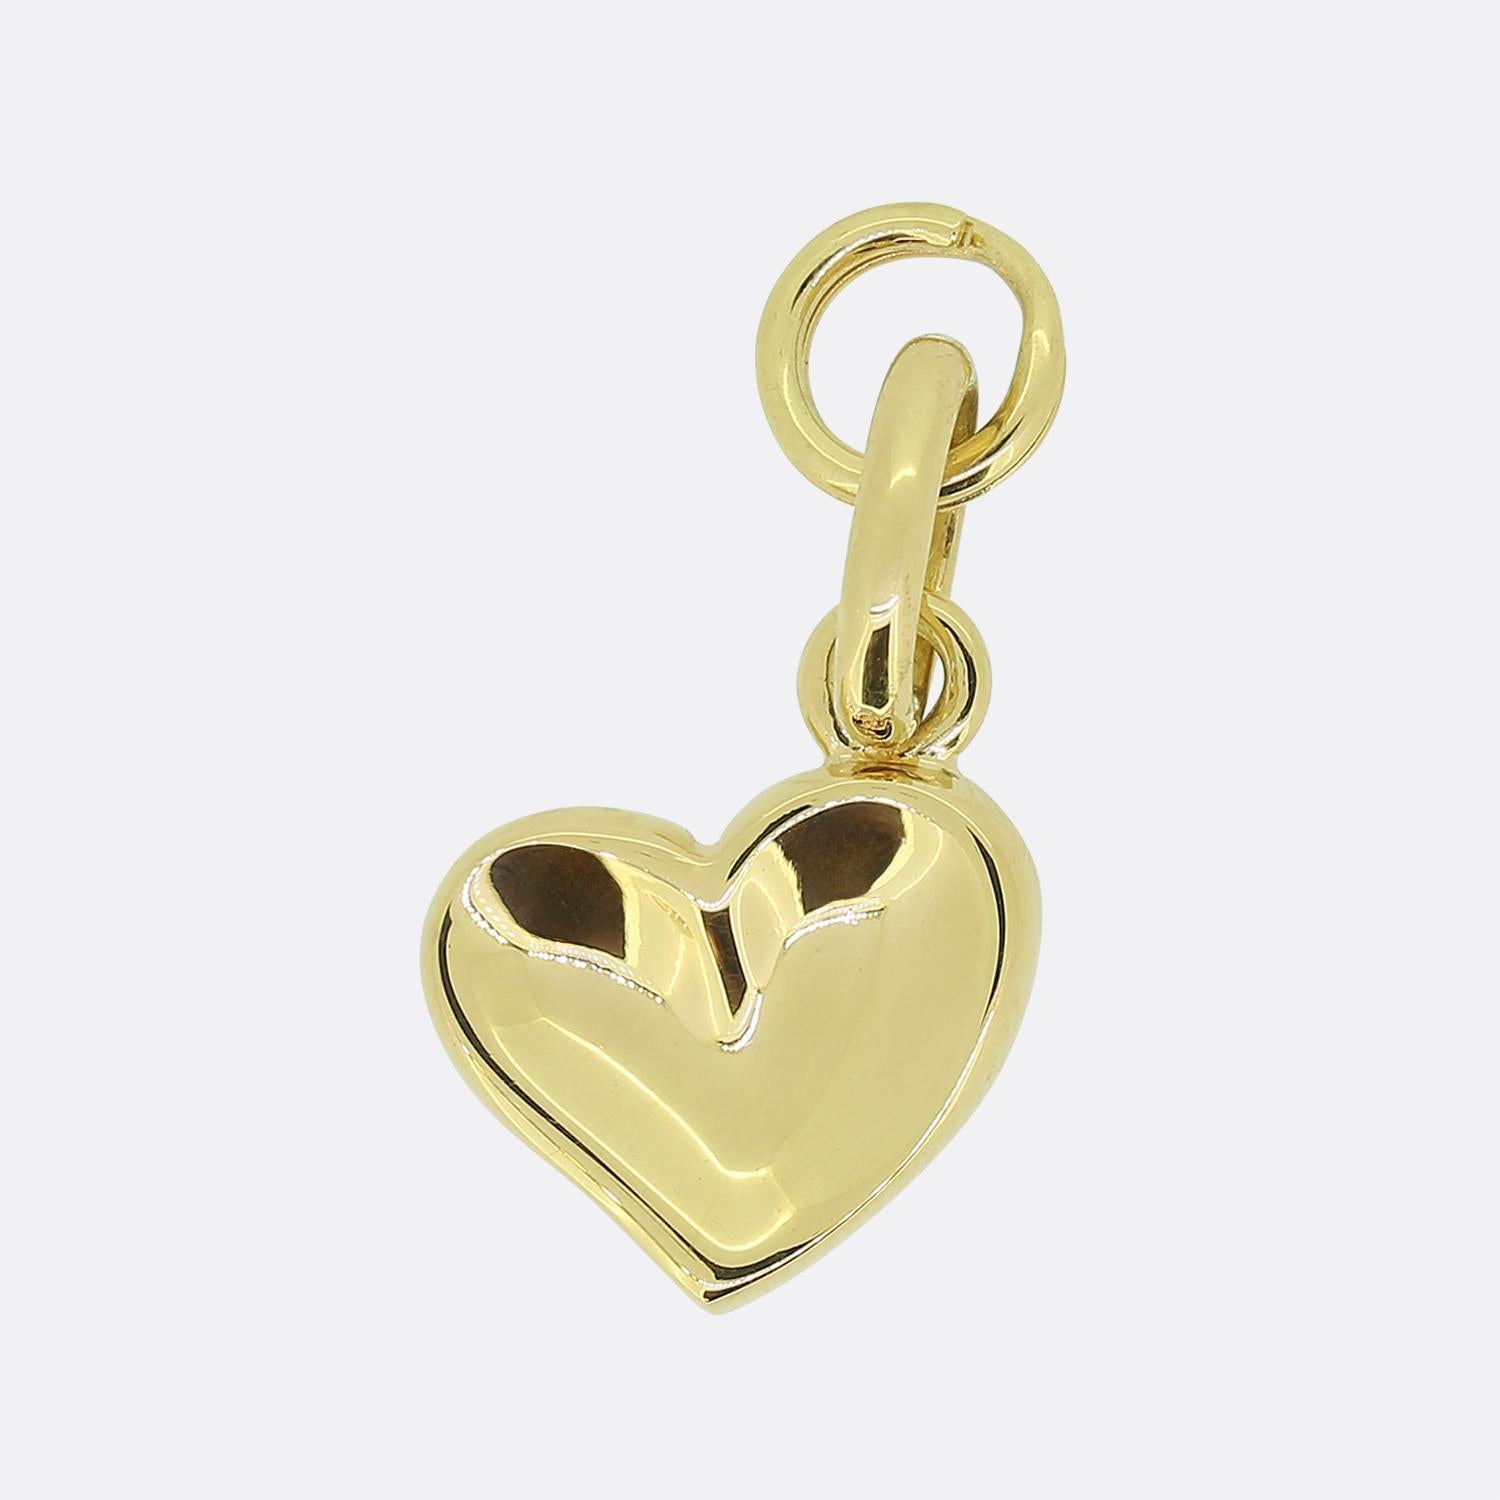 Here we have an 18ct yellow gold charm from the world-renowned (now retired) British jewellery designer, Links of London. This particular piece has been crafted into the shape of a thumb printed love heart. Due to its size this charm could also work